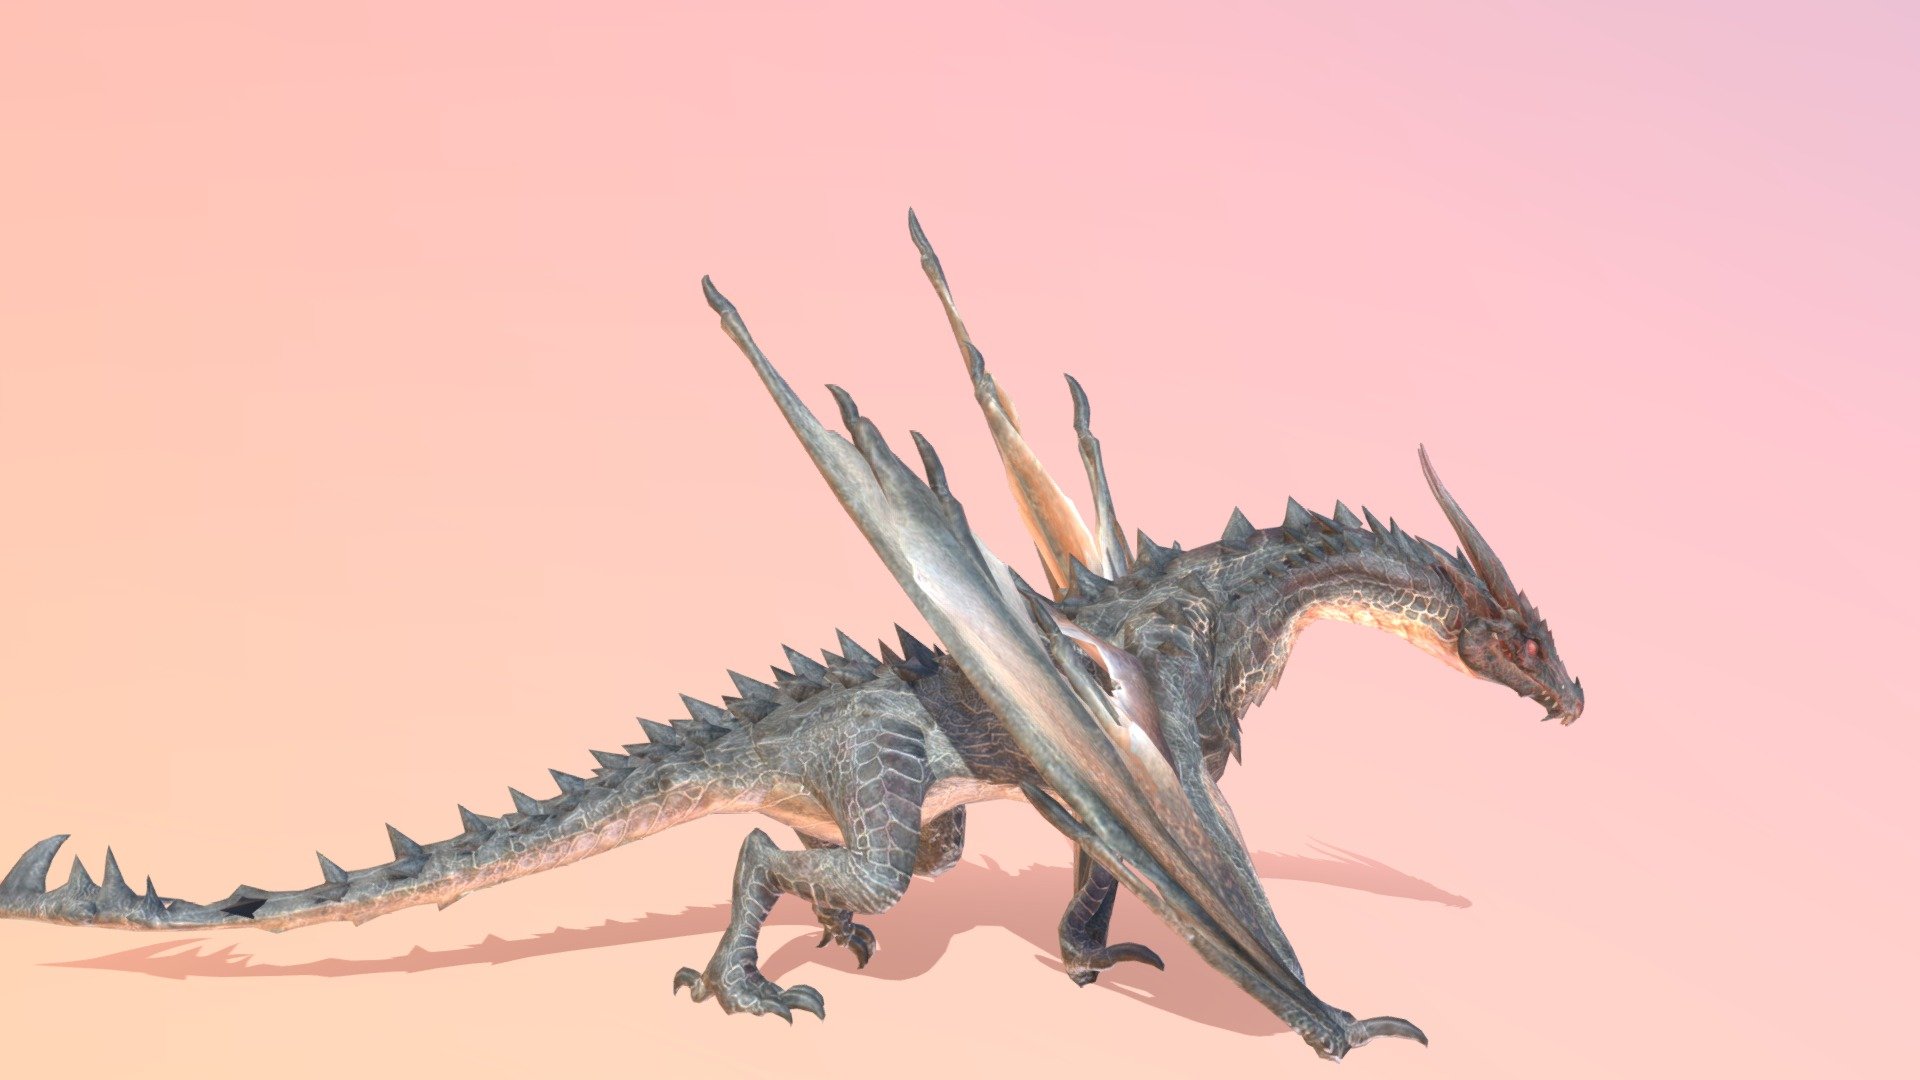 Wyvern Dragon walk-cycle  Animated
fbx file format - Wyvern Dragon Animated - Buy Royalty Free 3D model by aaokiji 3d model